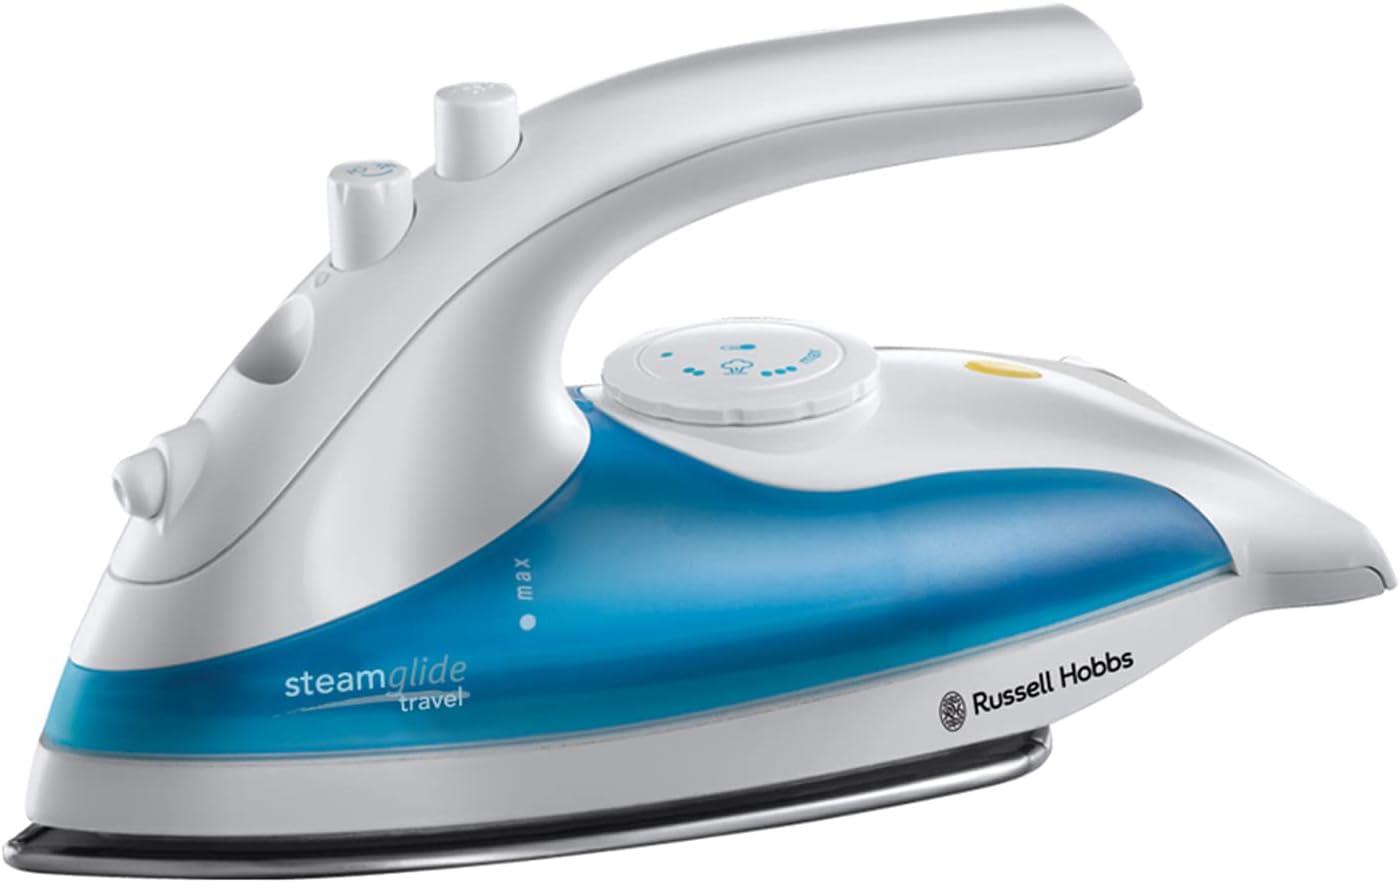 Russell Hobbs SteamGlide Dual Voltage Travel Iron